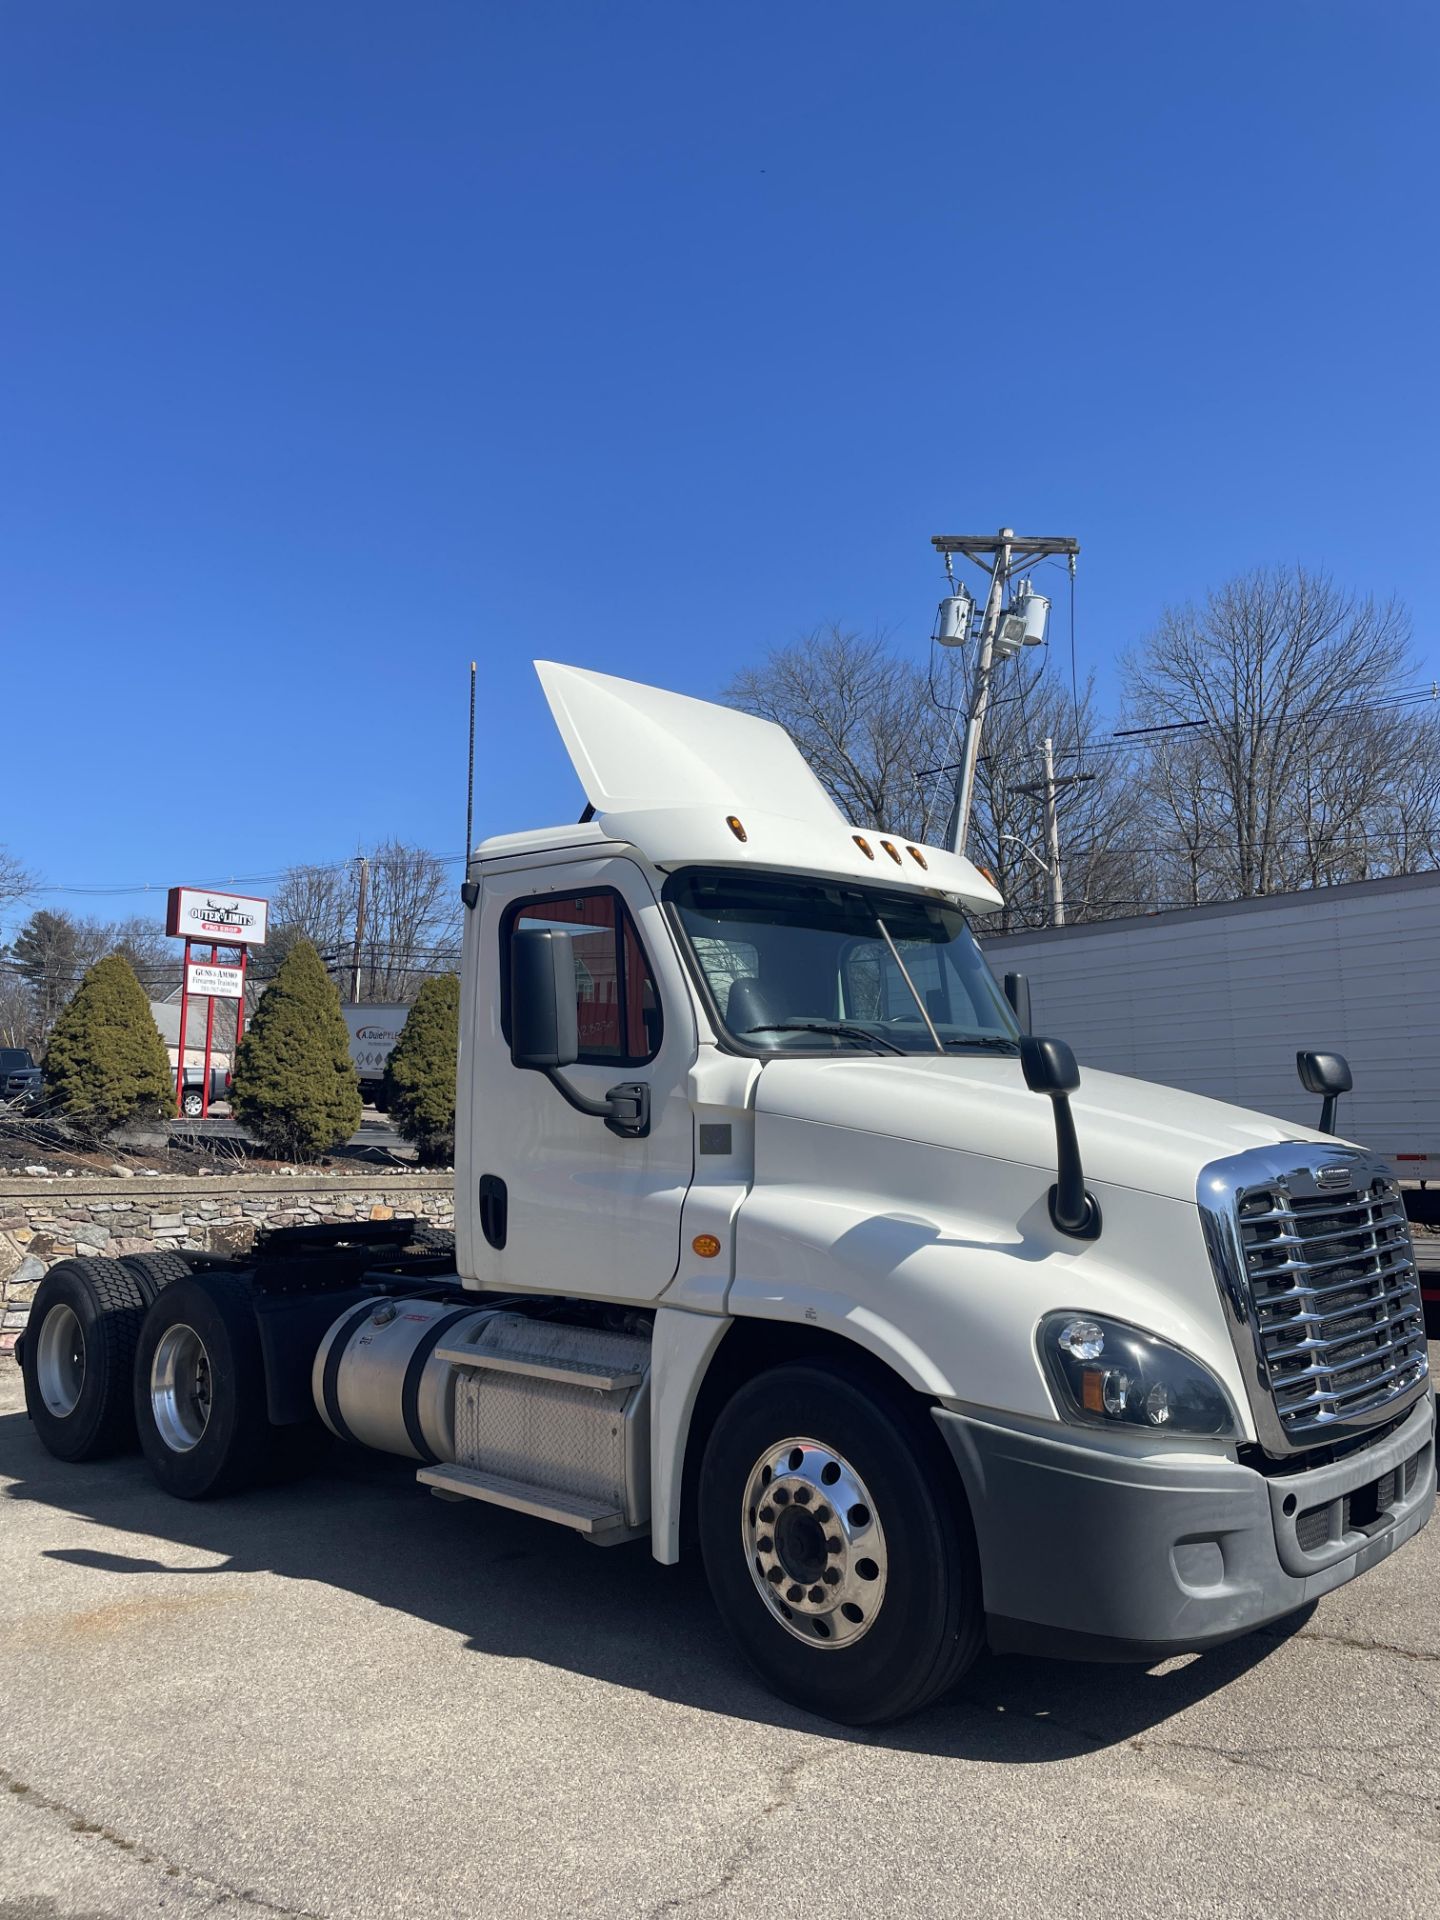 2016 Freightliner Cascadia 10 Wheel, Tandem Axle Day Cab Tractor,Detroit DD13 - 500 HP Motor, Auto T - Image 2 of 18